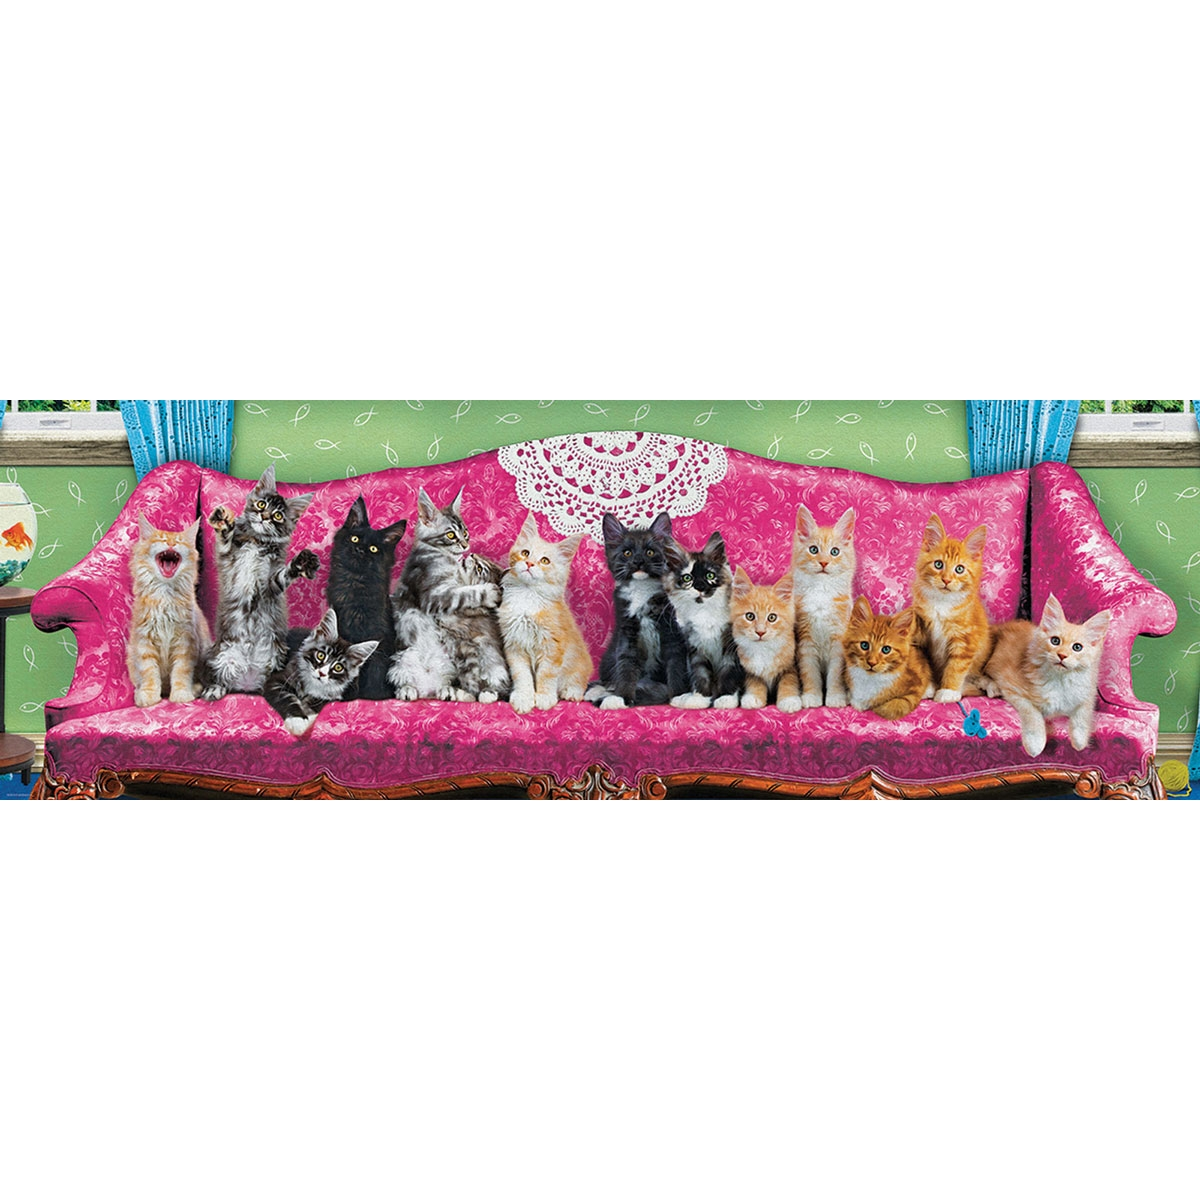 EUROGRAPHICS Panoramapuzzle Kitty Cat 1000 Teile - Puzzle Couch